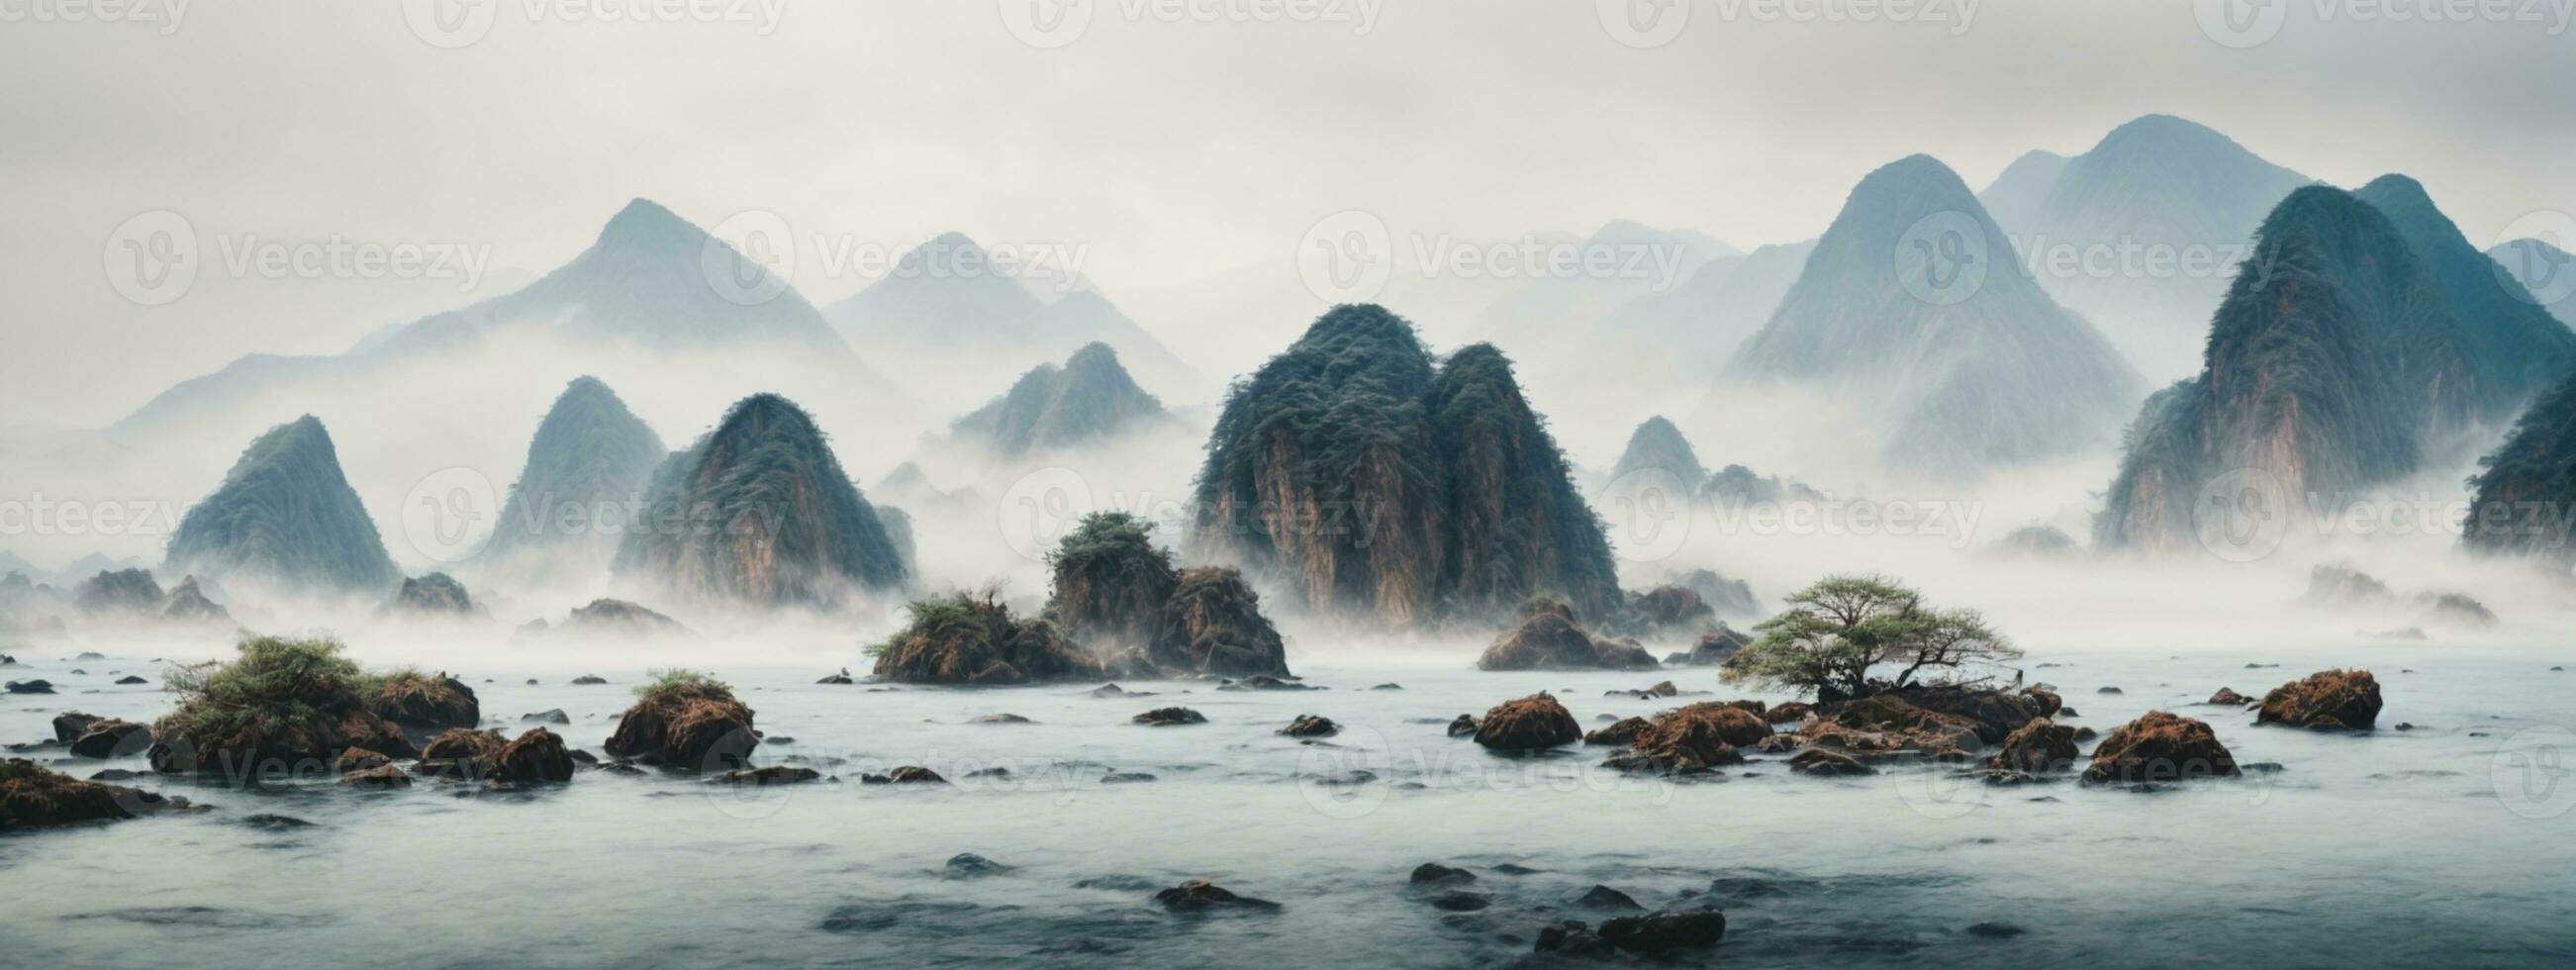 Chinese ink and water landscape painting. AI generated photo